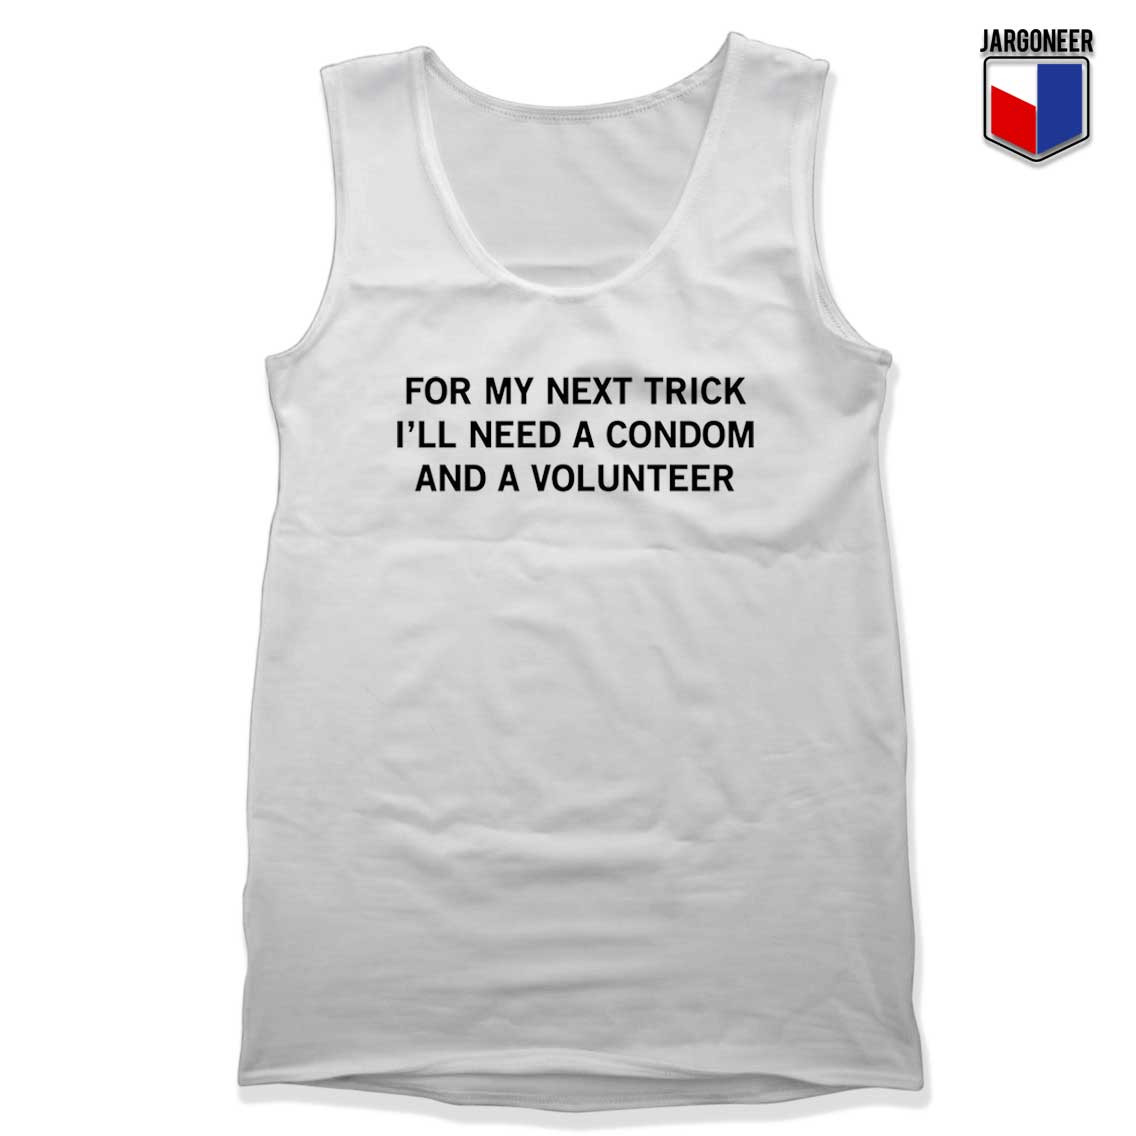 For My Next Trick Ill Need A Condom And A Volunteer Tank Top - Shop Unique Graphic Cool Shirt Designs